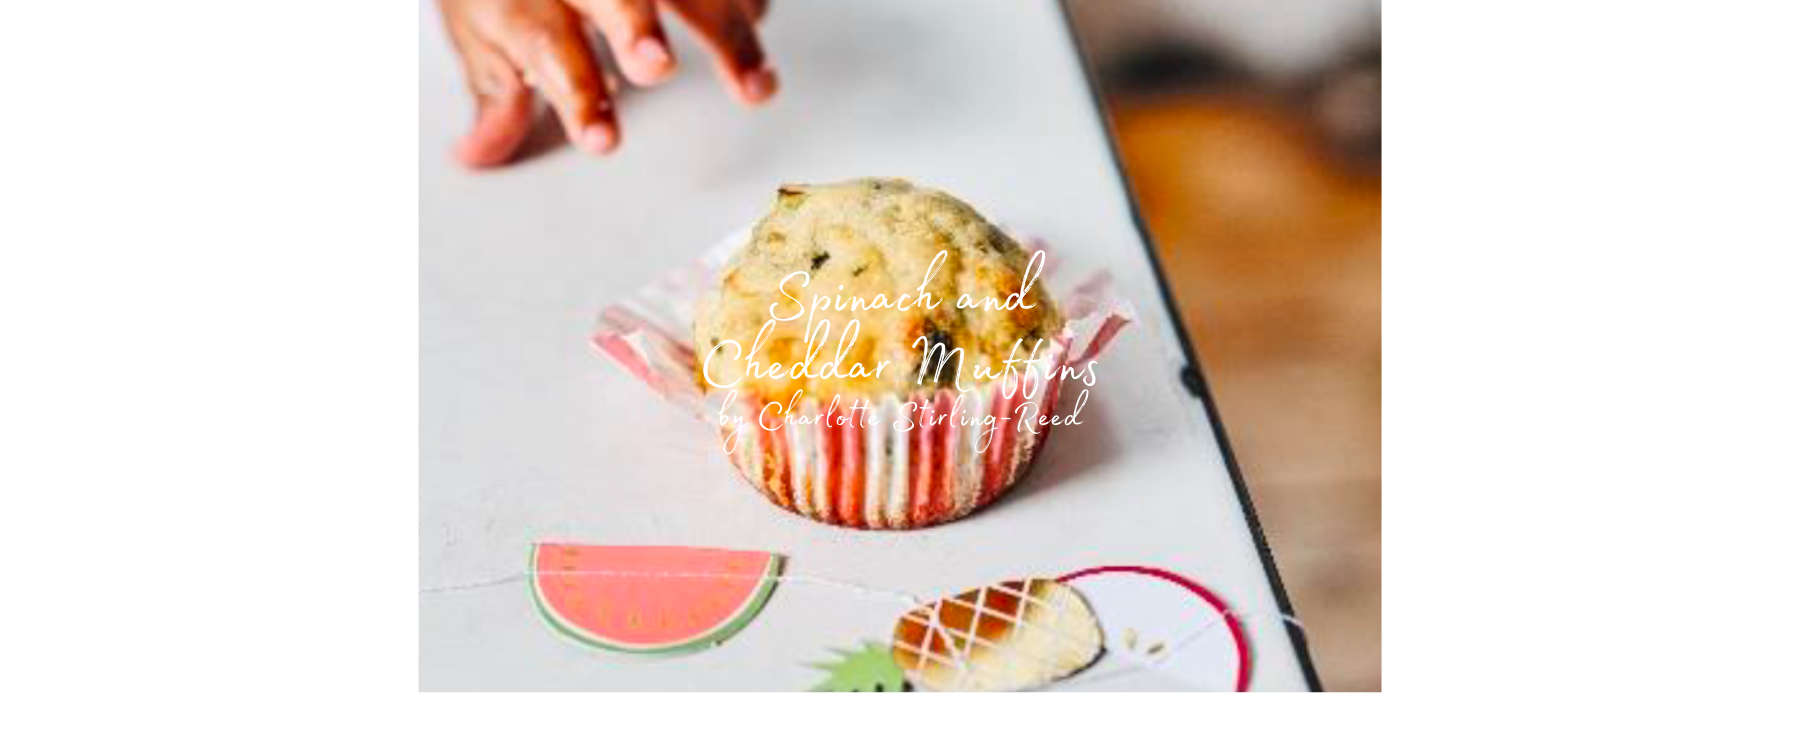 Spinach and Cheddar Muffins - Charlotte Stirling-Reed